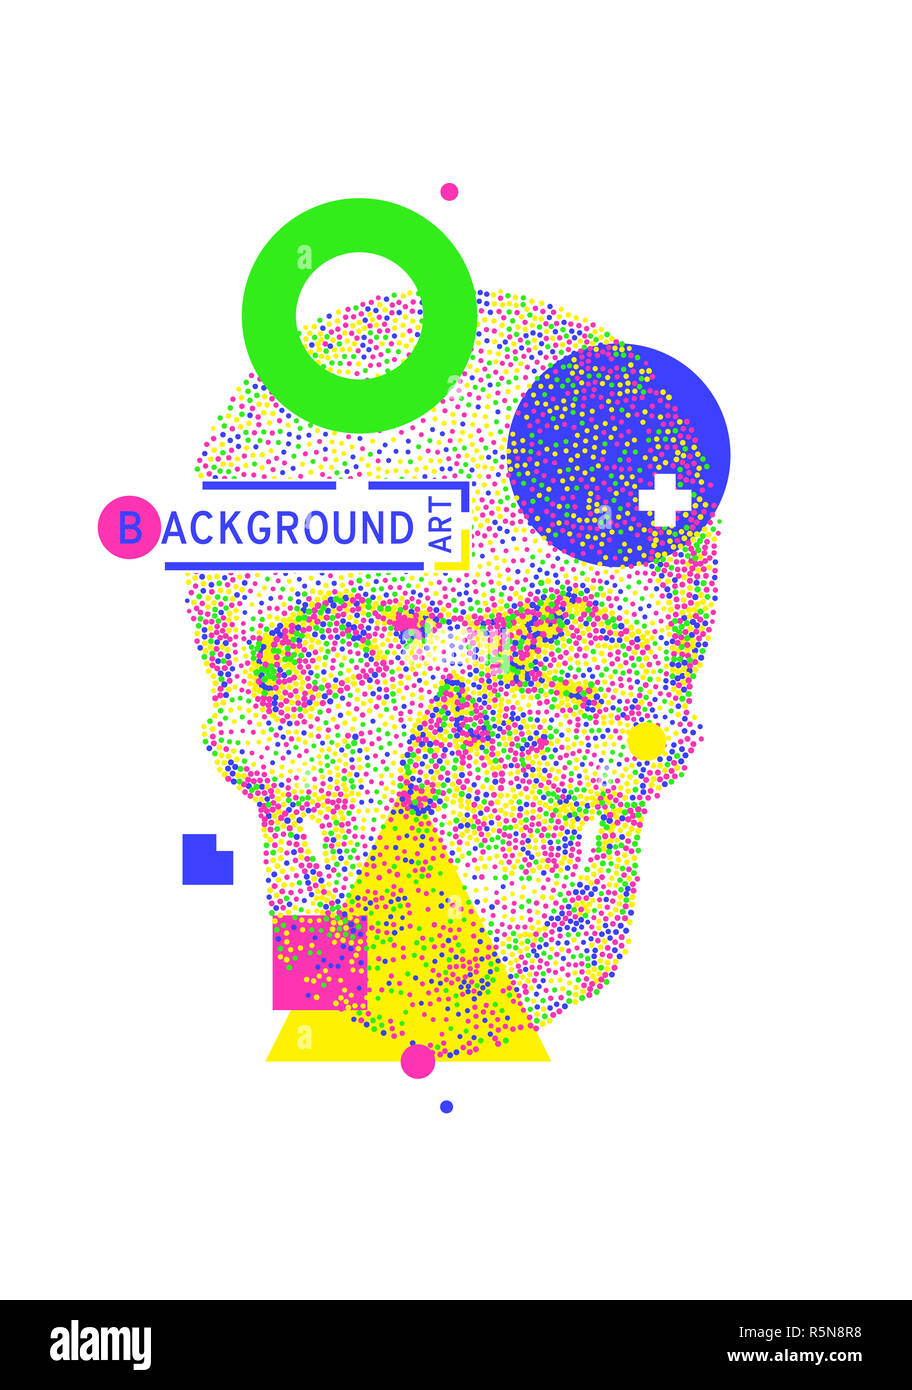 Geometric background with colorful skull Stock Photo